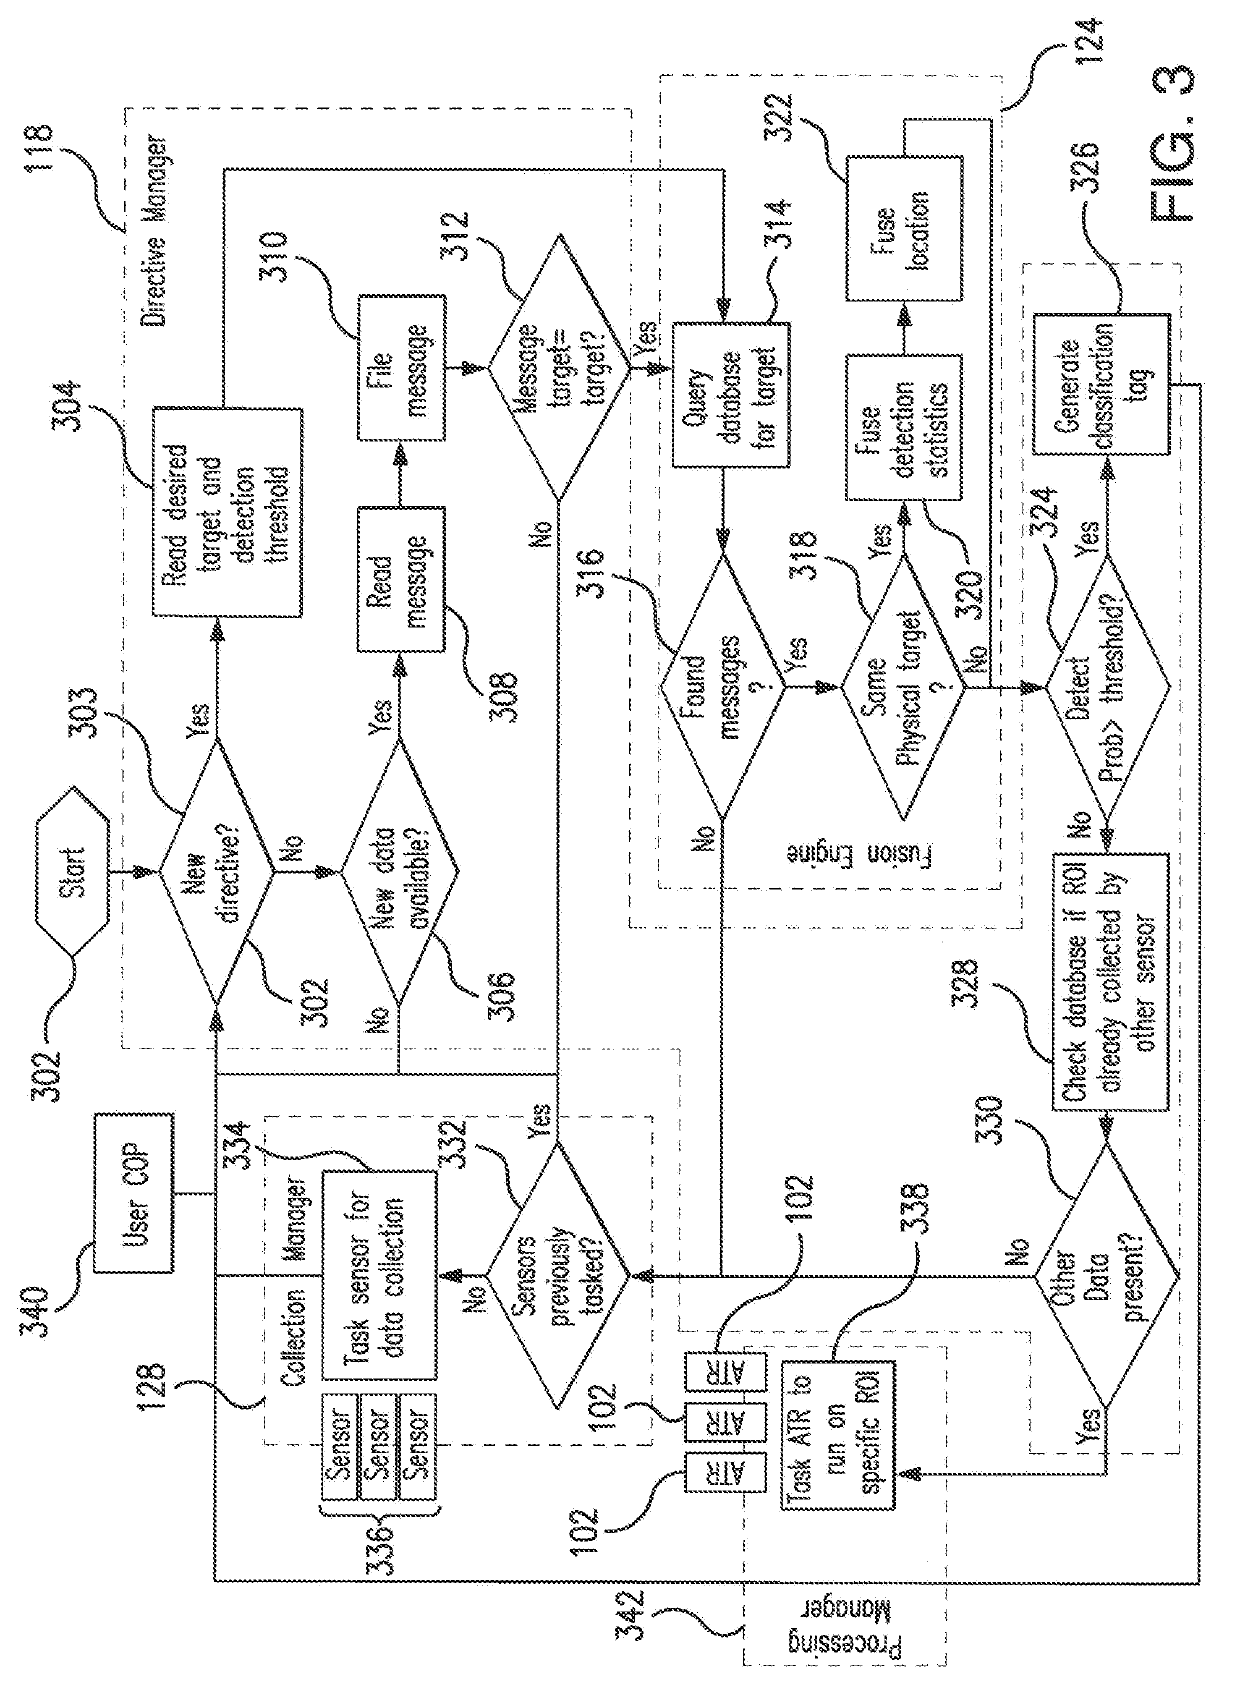 Multi-domain operational environment utilizing a common information layer